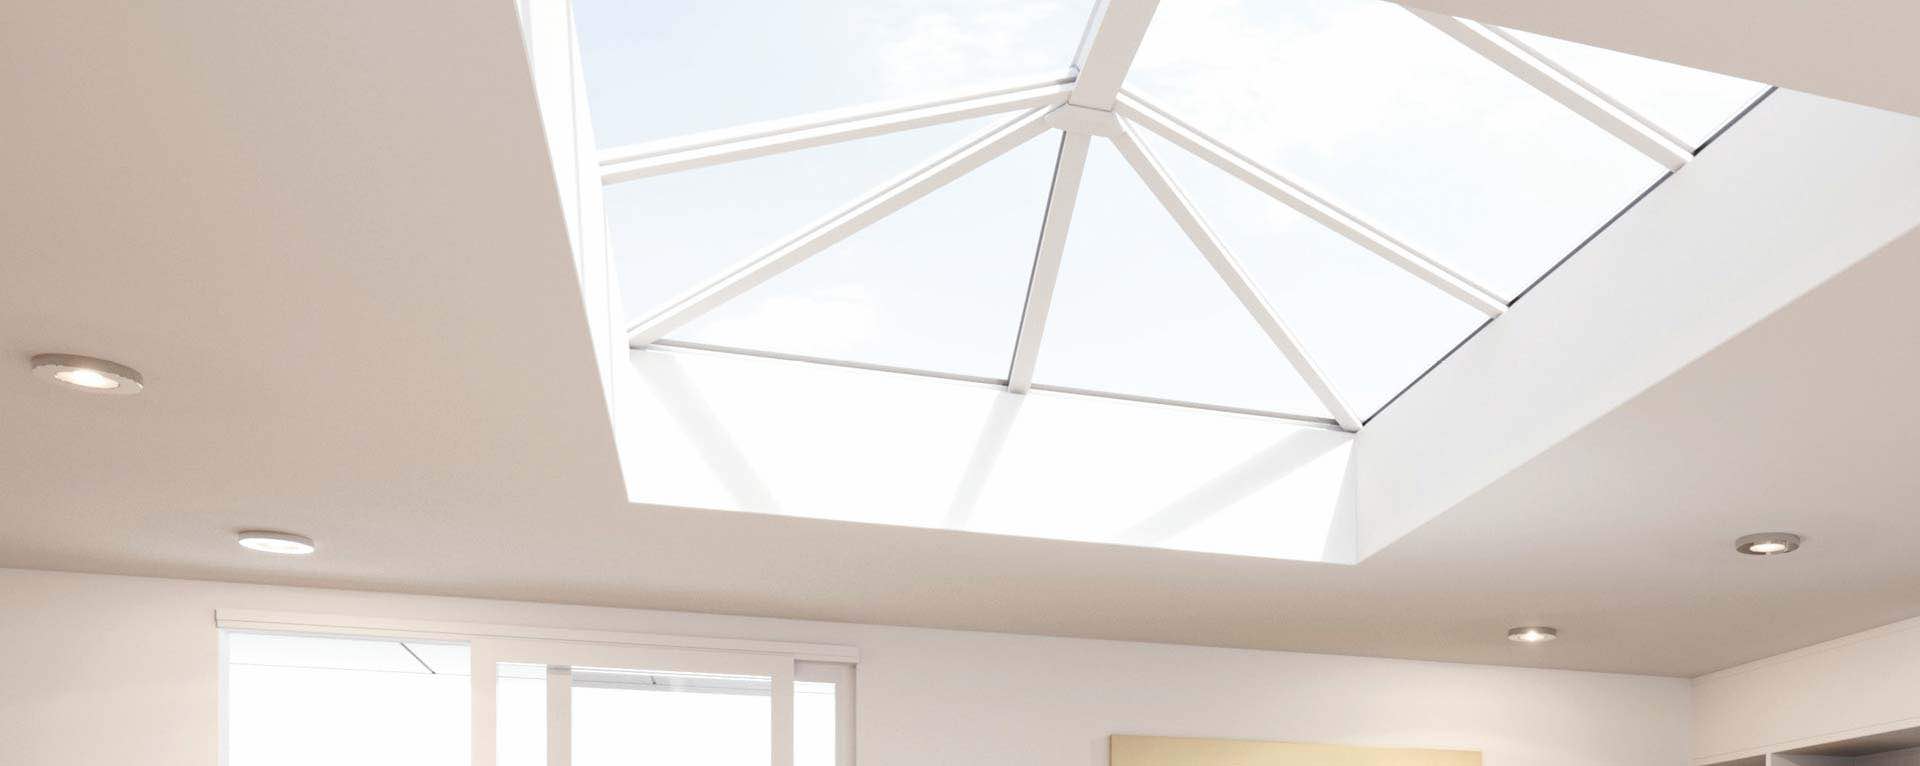 X 2 Stratus Thermal Lantern Roofs Contemporary Design Width 1500mm Length 3000mm 